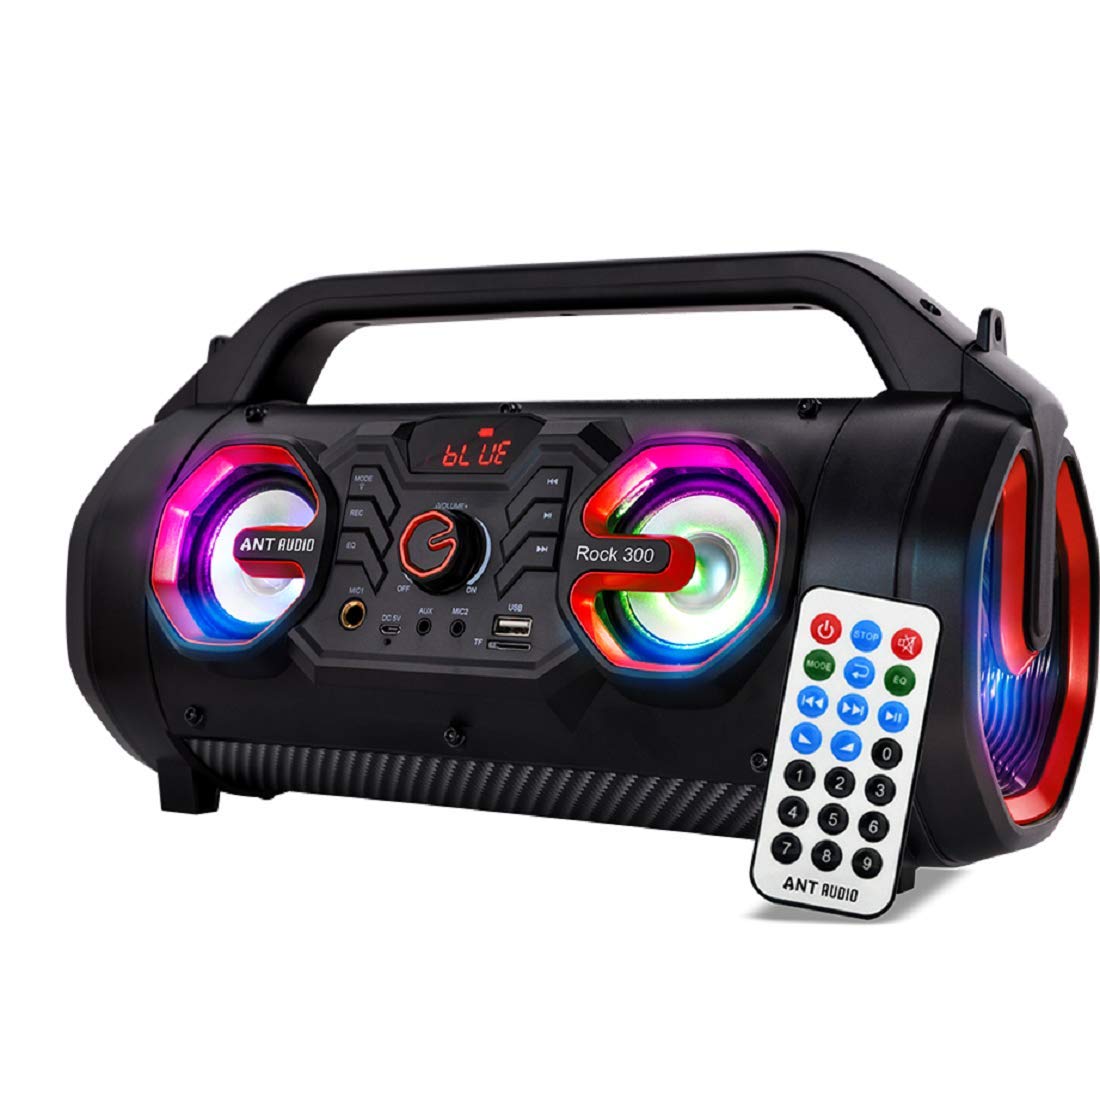 Ant Audio Rock 300 Bluetooth Party Speakers with FM Radio, Micro SD Card, USB, MIC and Aux 3.5 mm Support, Microphone for Karaoke Machine, L